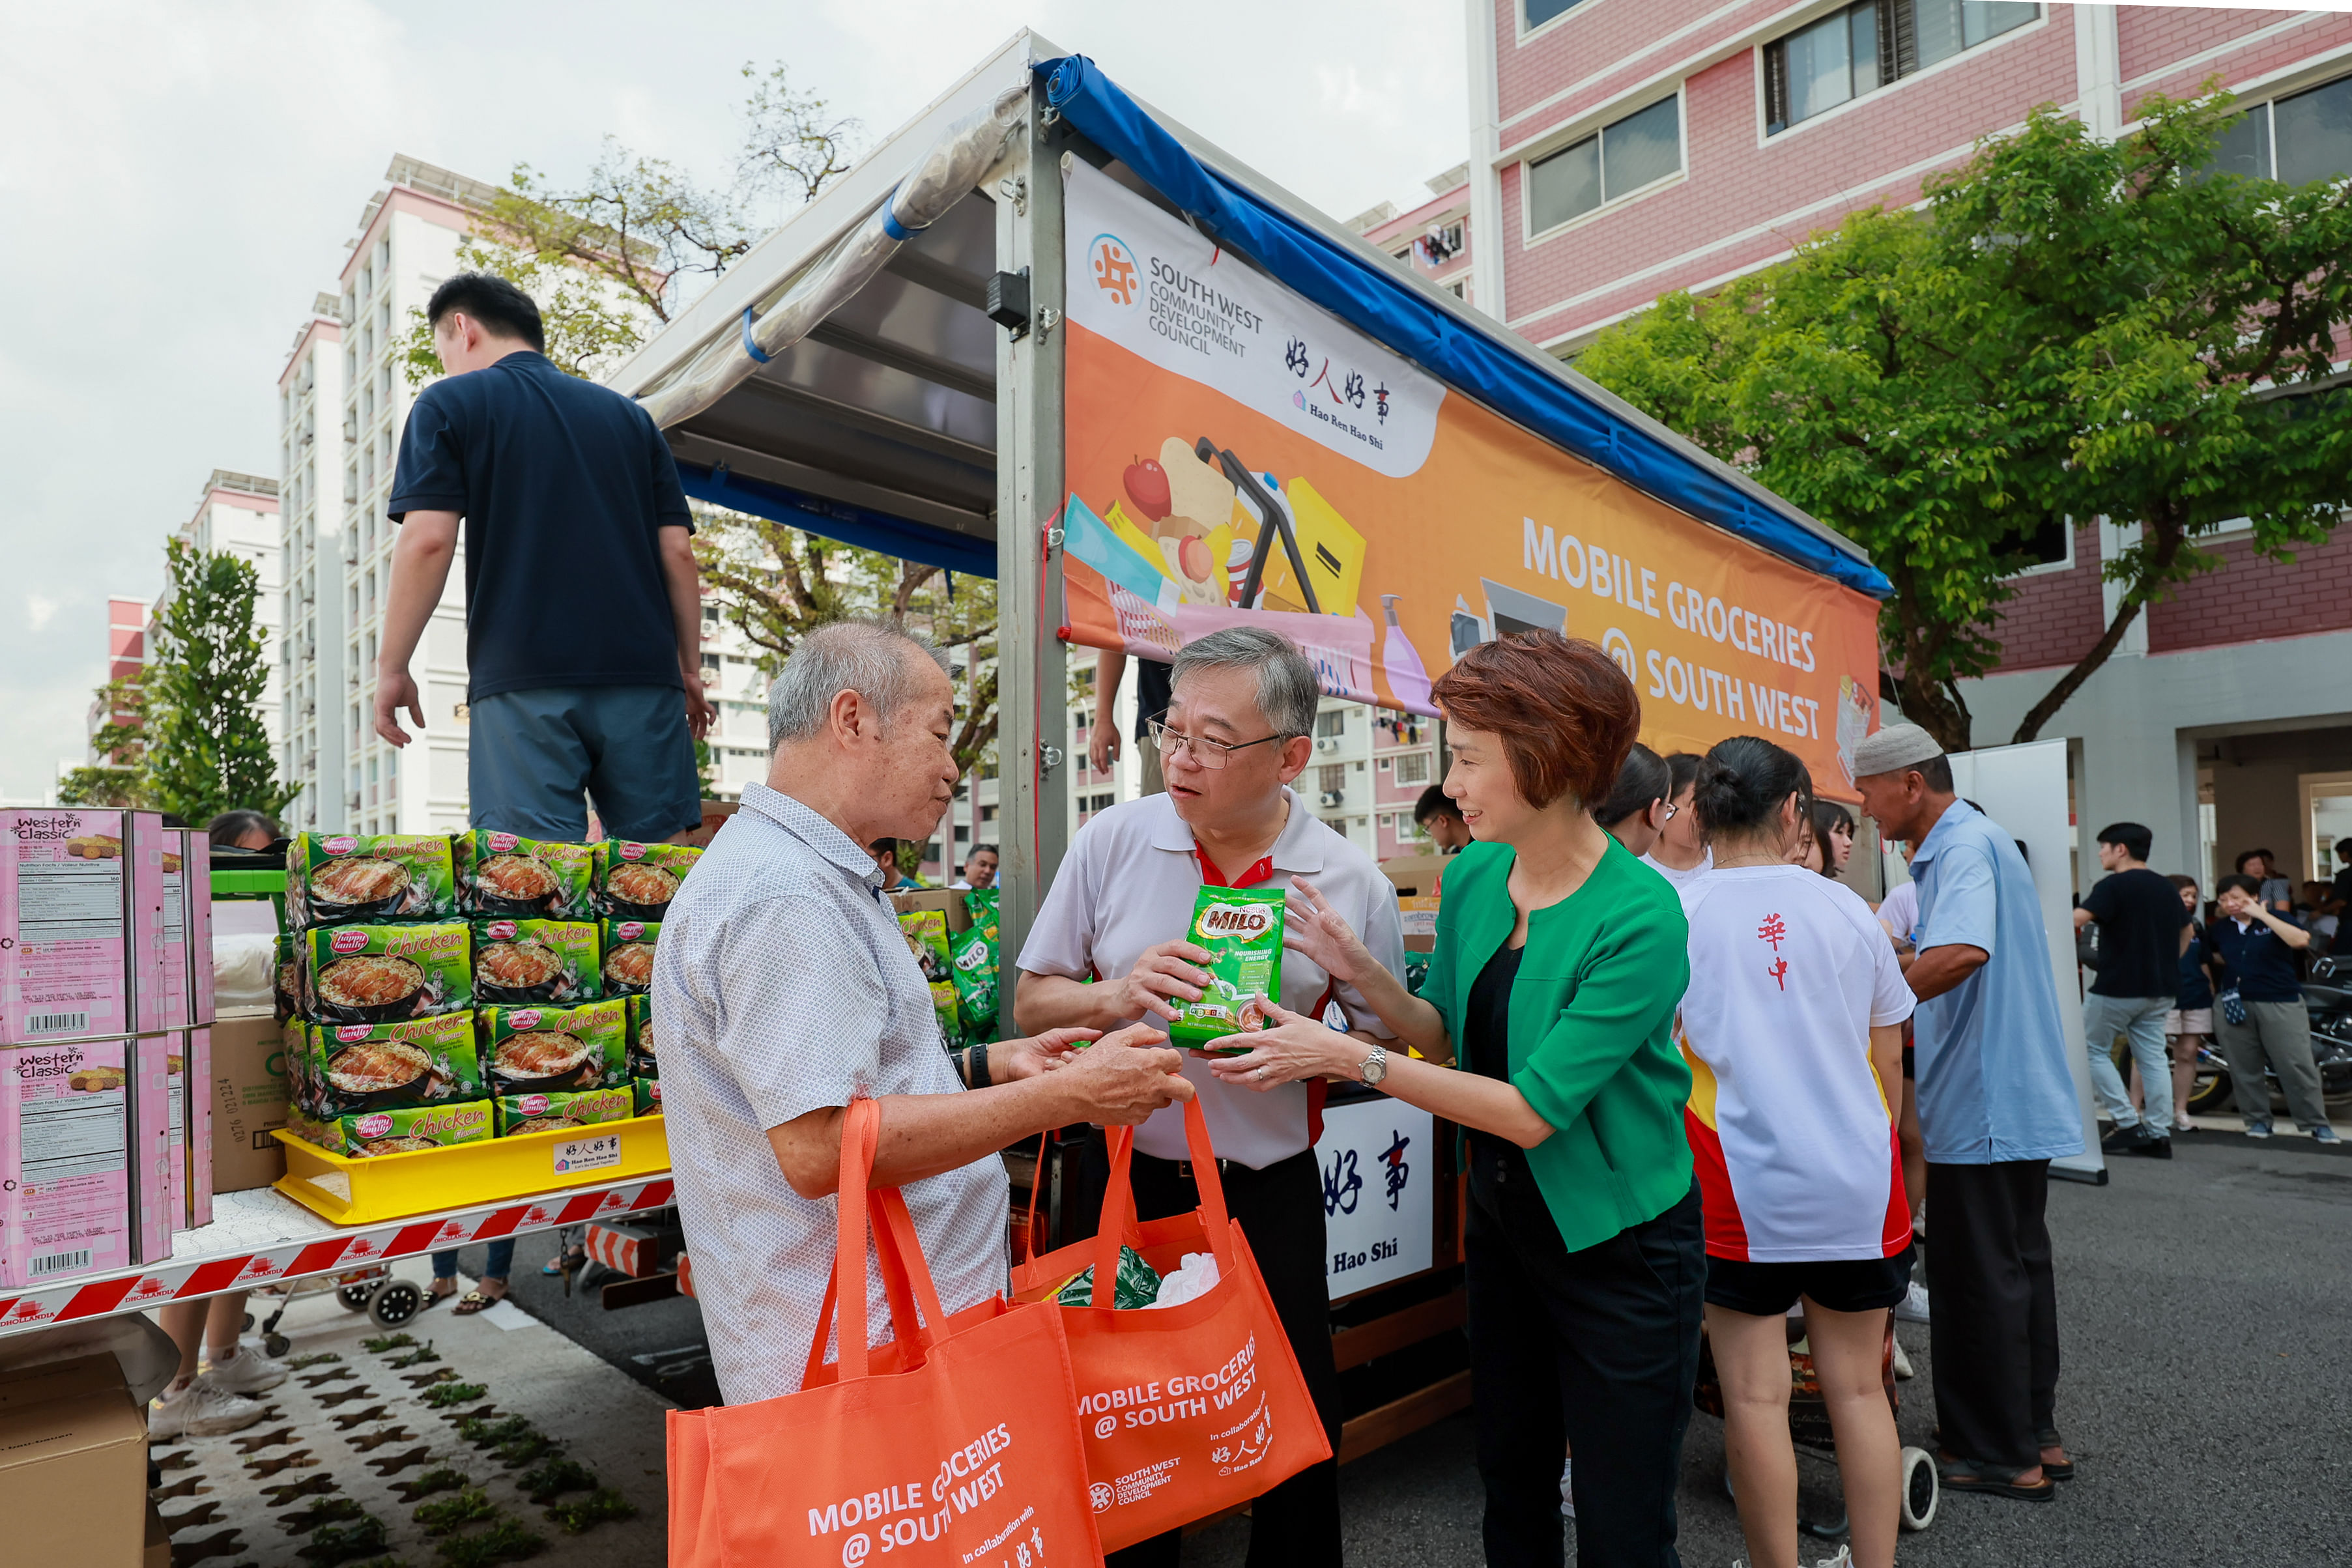 Mobile grocery trucks to serve 7,200 vulnerable families in South West district over 2 years